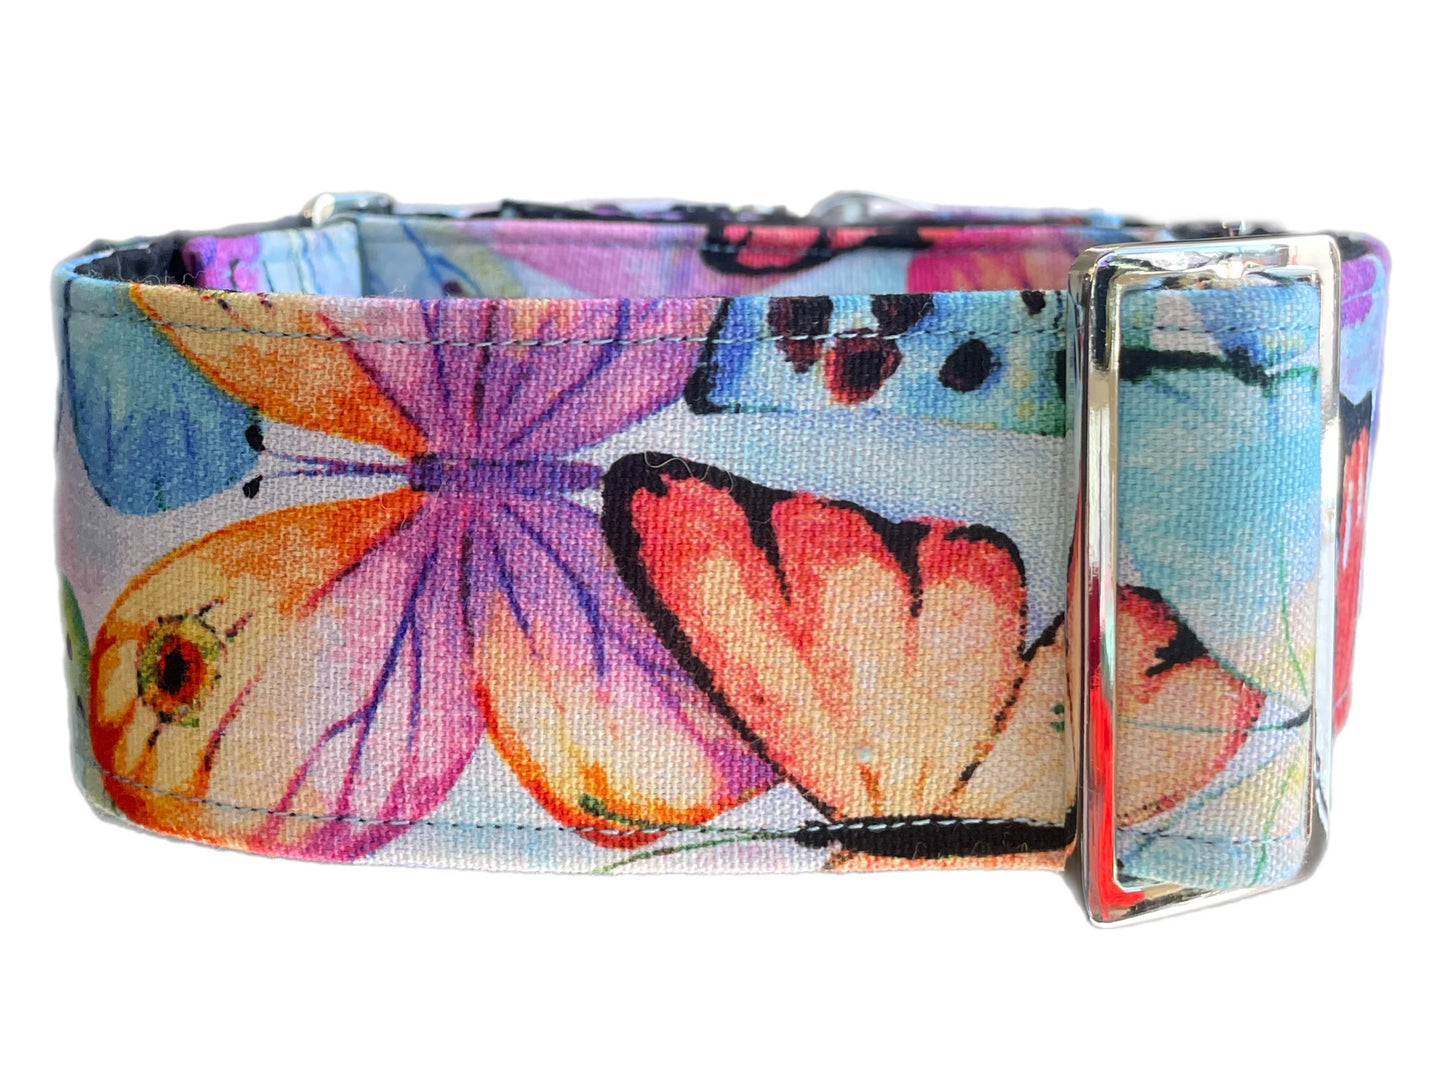 Big butterflies design in pastel colors greyhound Martingale collar cotton covered 50mm width